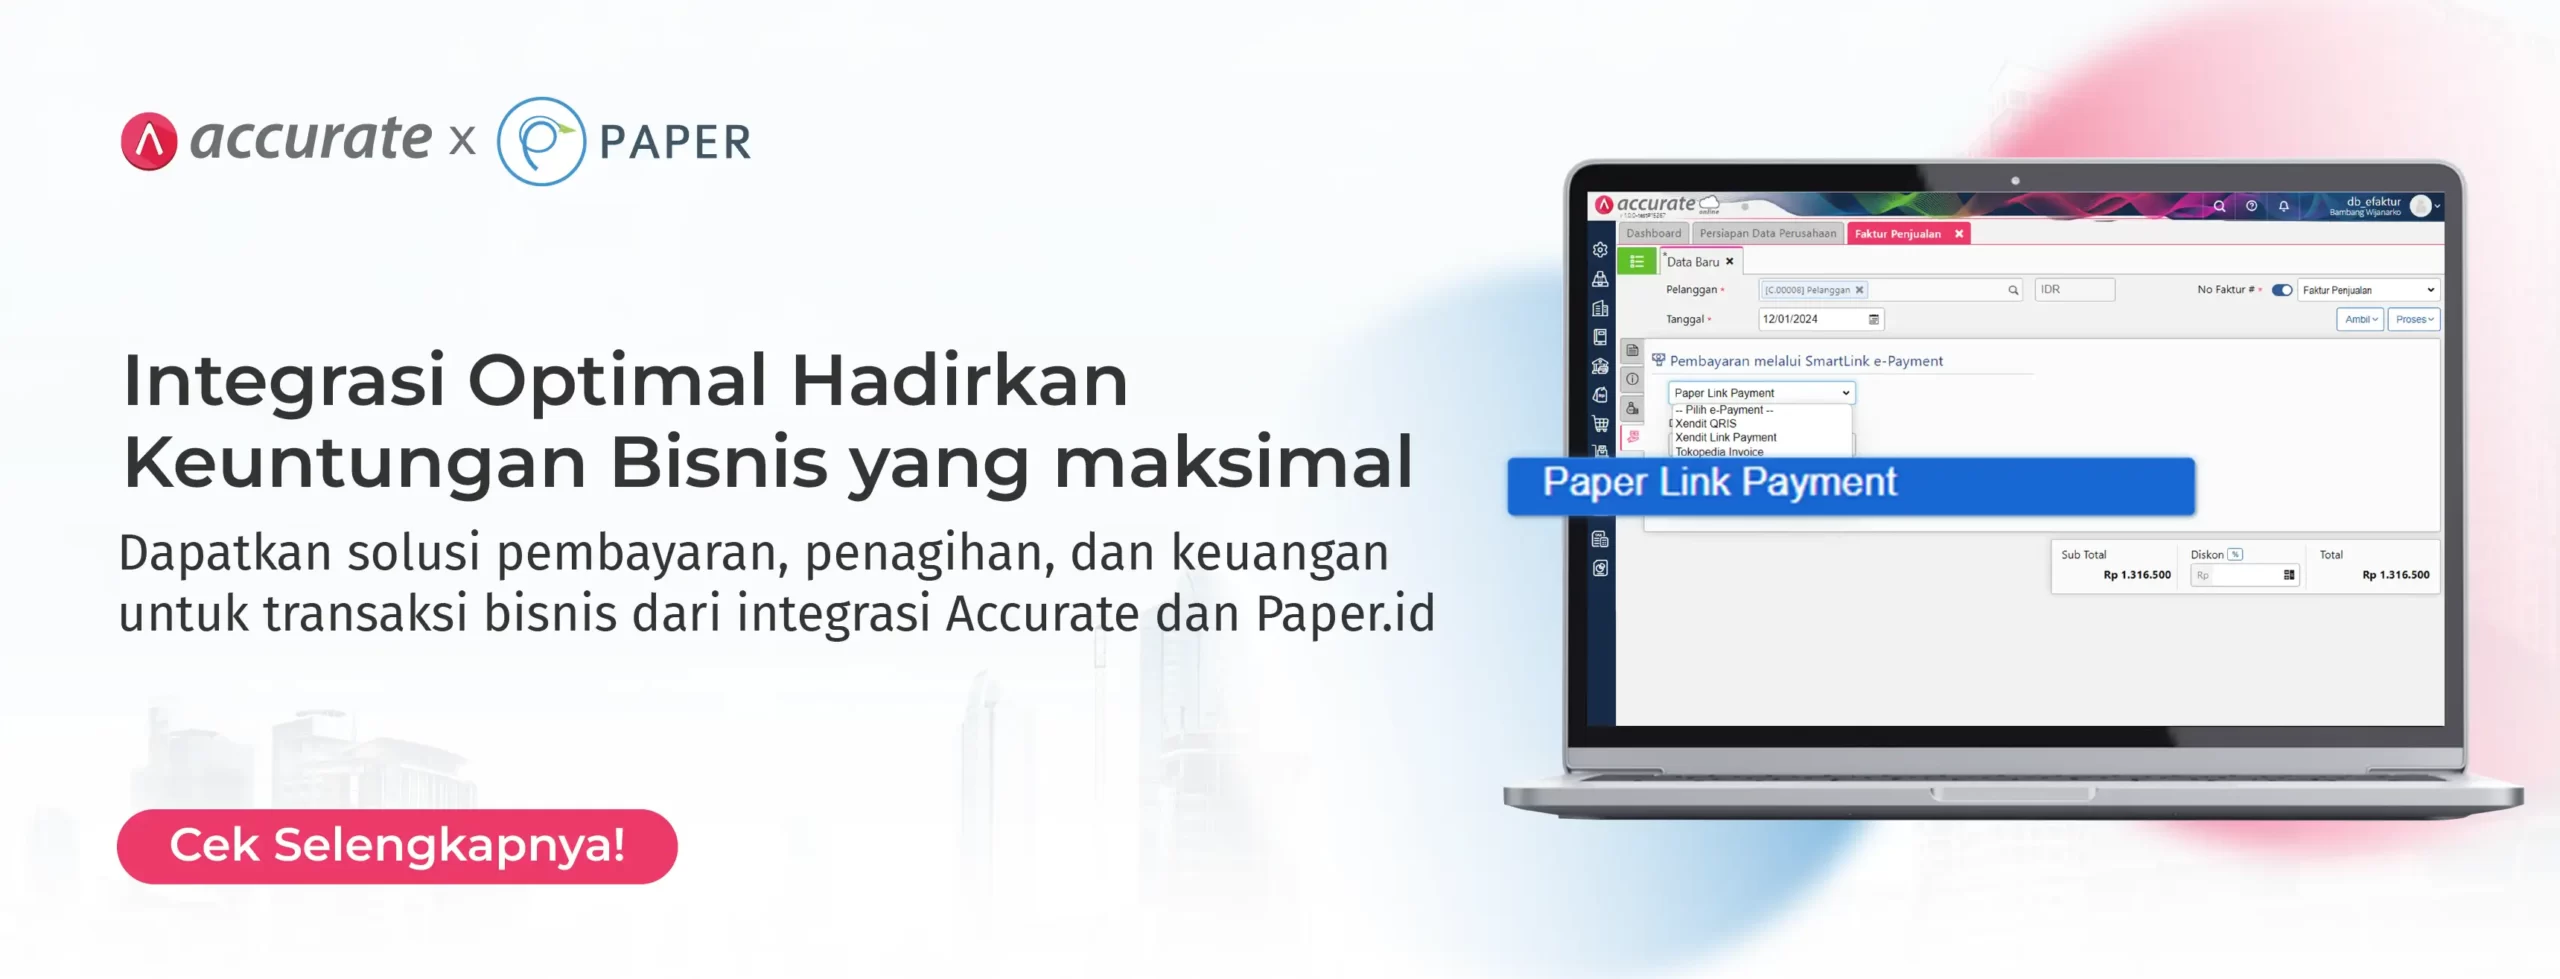 footer image accurate x paper.id